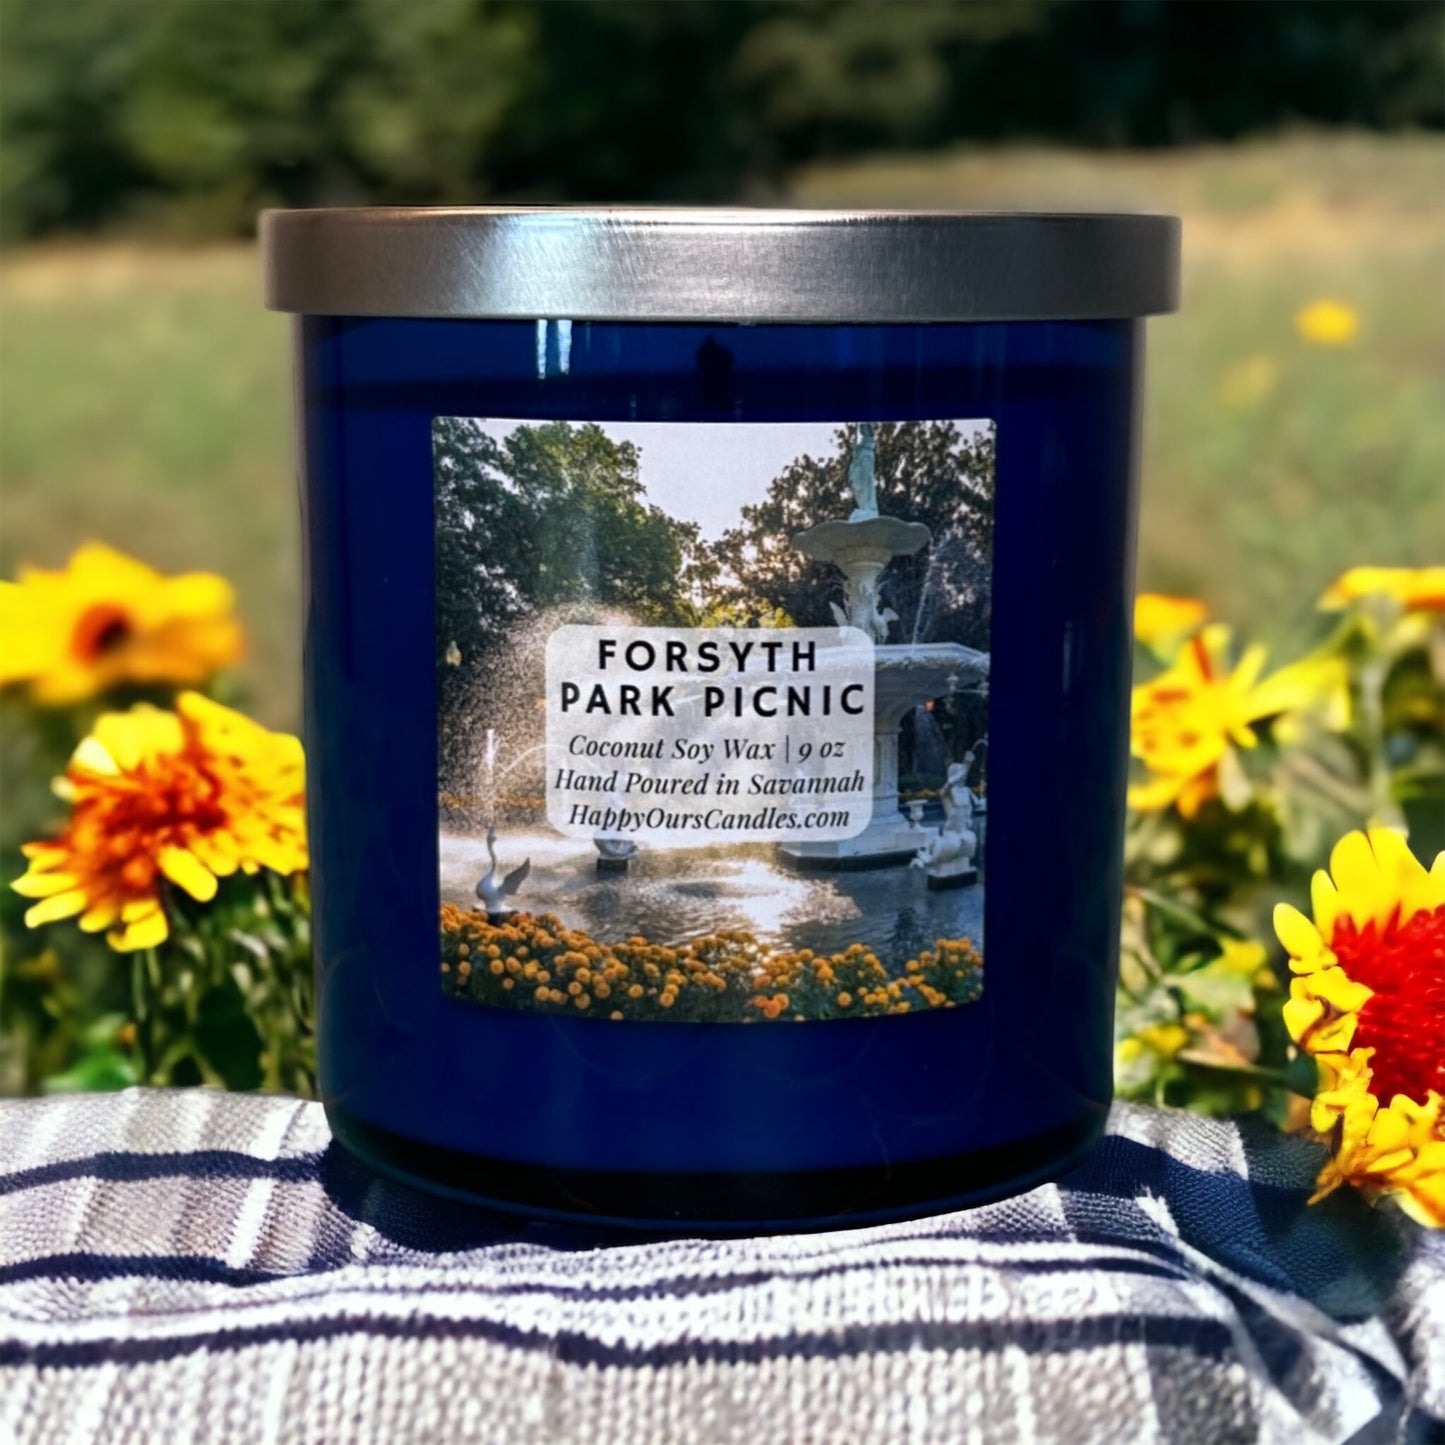 Forsyth Park Picnic Scented Candle 9 oz